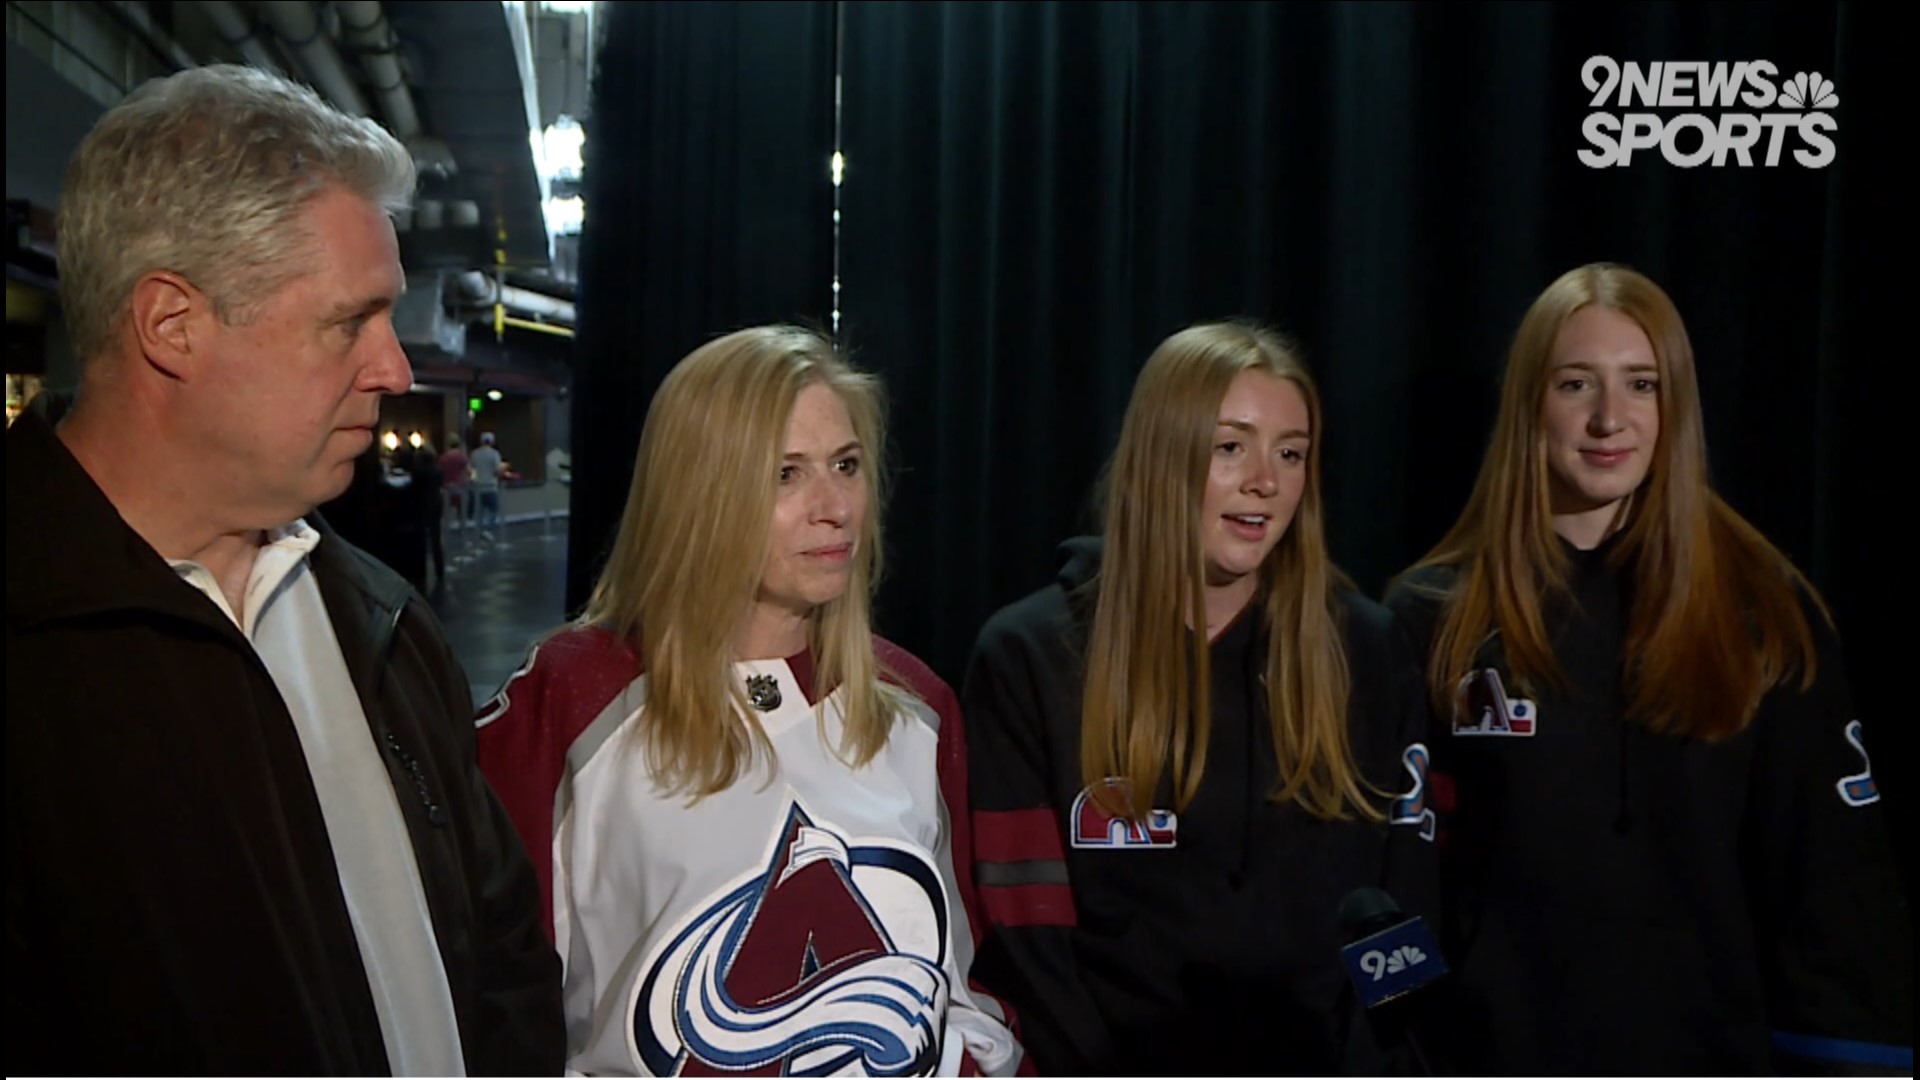 The Avalanche forward's immediate family visited Denver for the Western Conference Final home games, including his Olympic silver medalist sister, Jesse Compher.